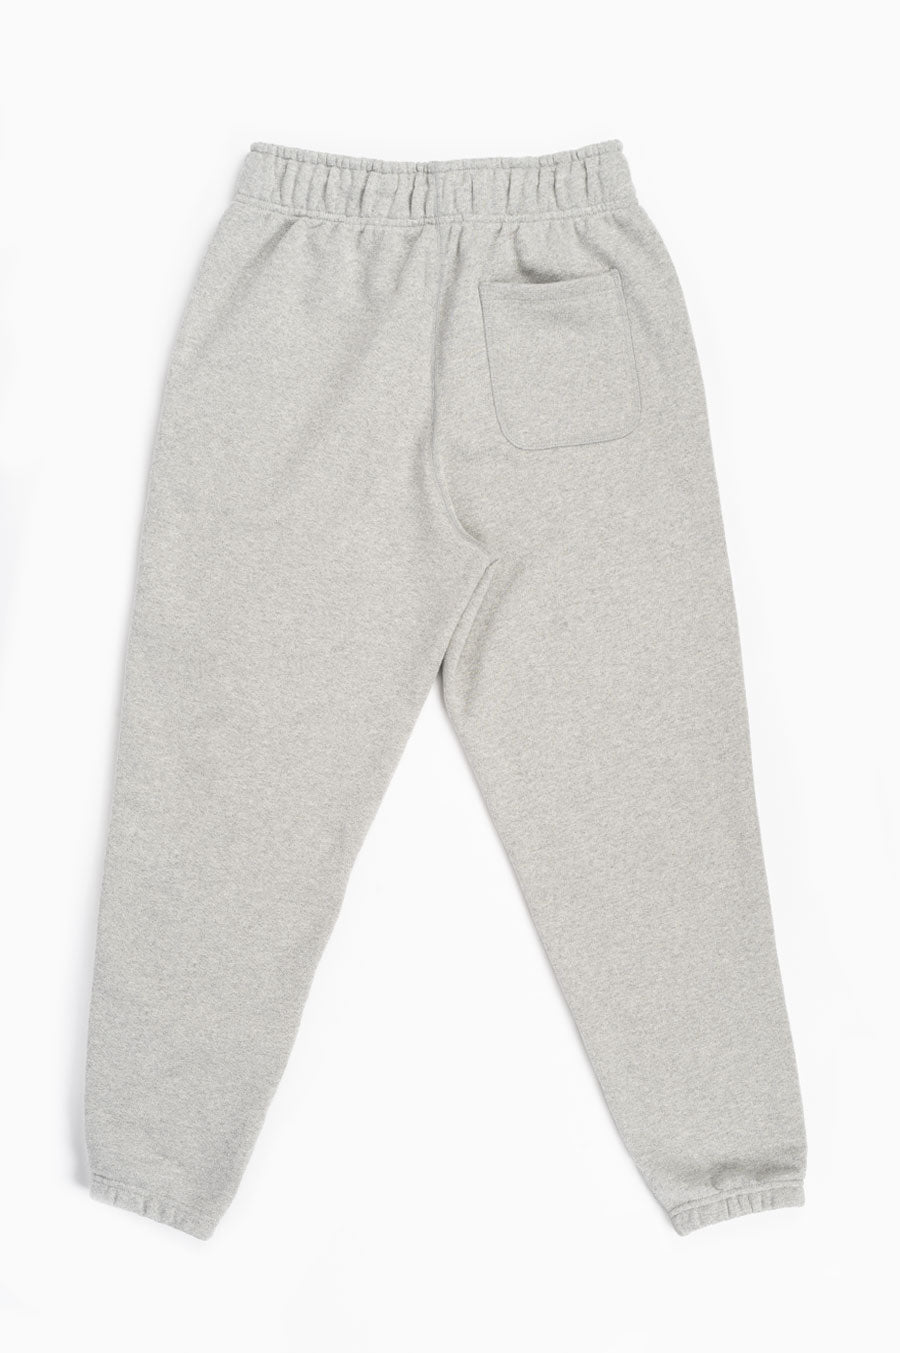 USA BLENDS GREY – BALANCE ATHLETIC NEW IN SWEATPANT MADE